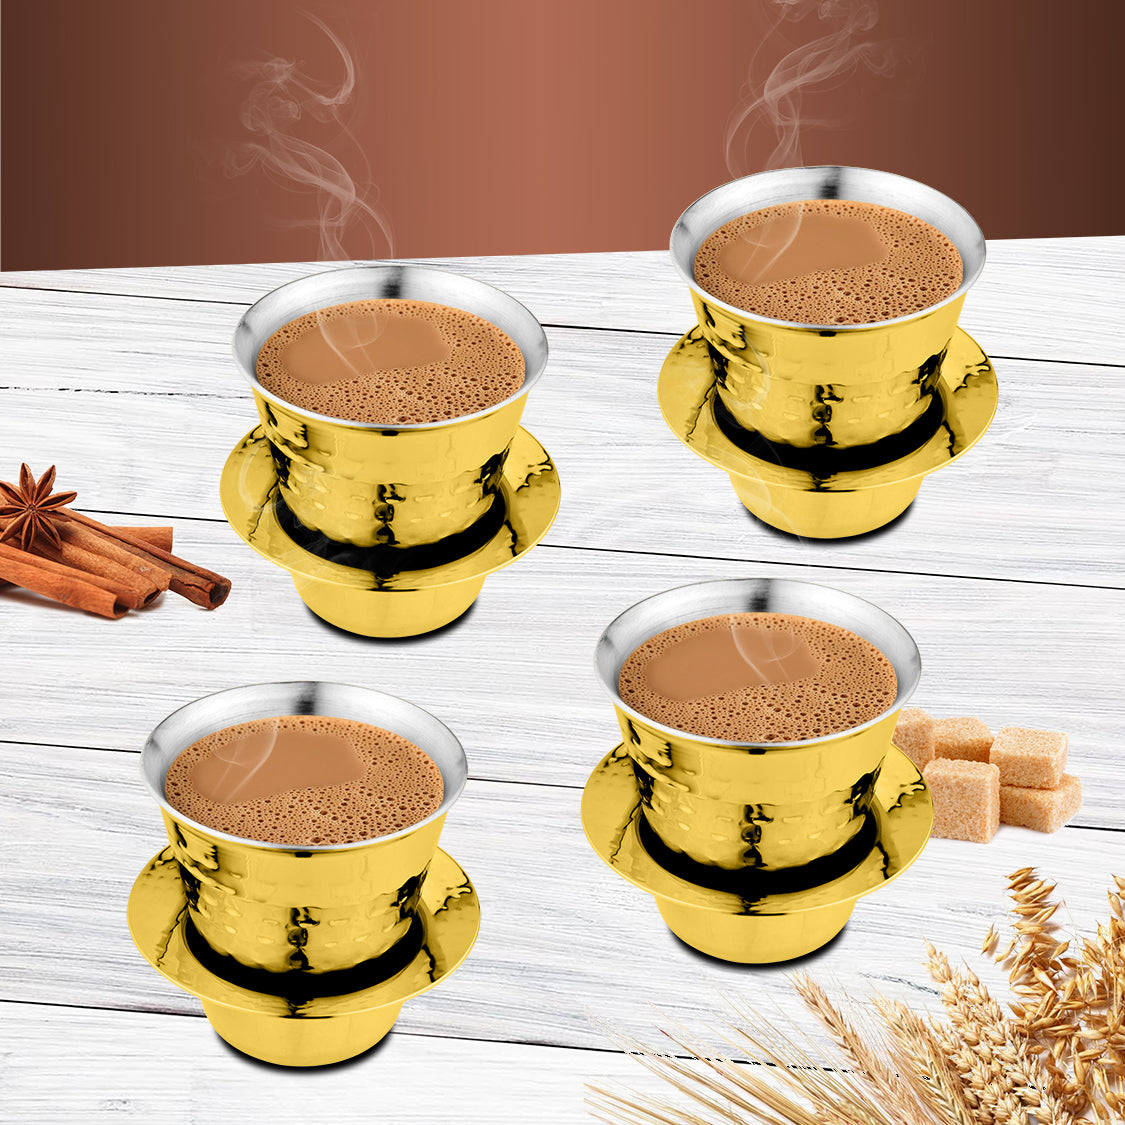 Stainless Steel 4 PCS Double Wall Hammered Coffee Dabra In Tumbler with Gold PVD Coating Congo